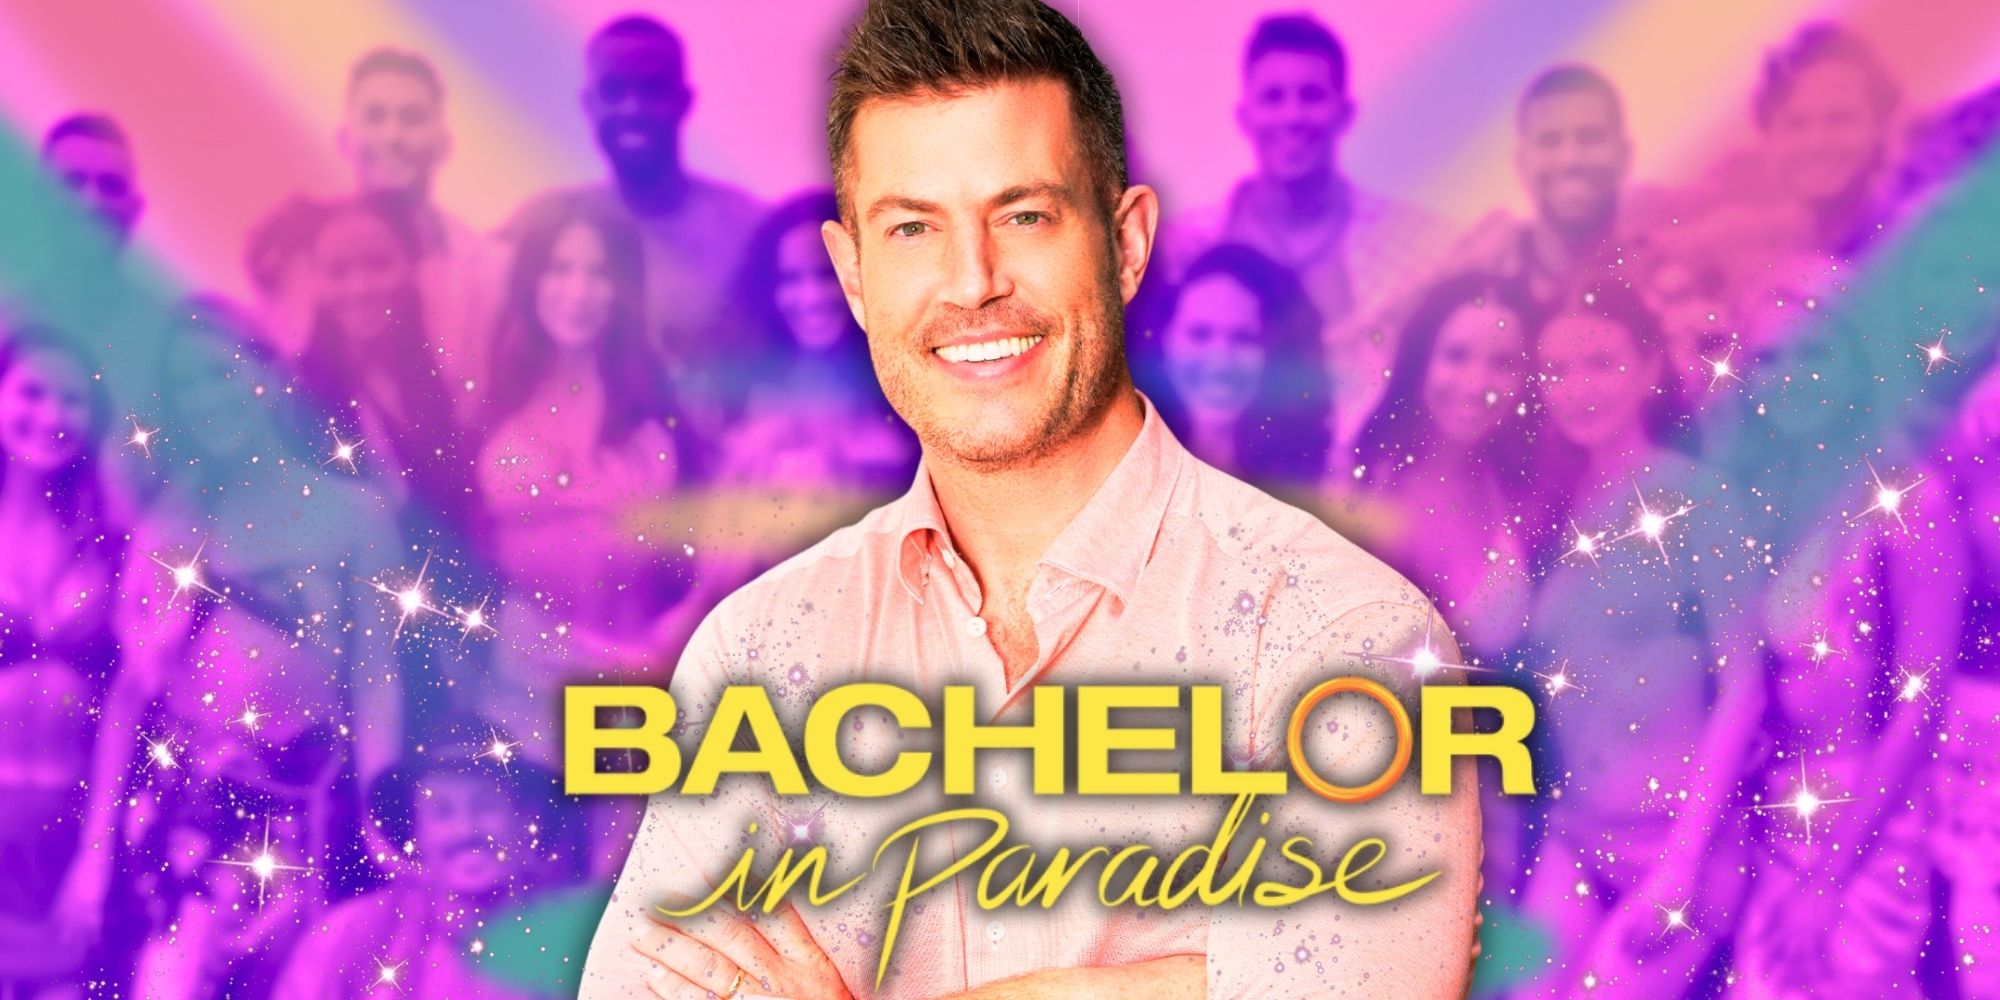 Bachelor In Paradise Season 9 cast with Jeese Palmer at the front